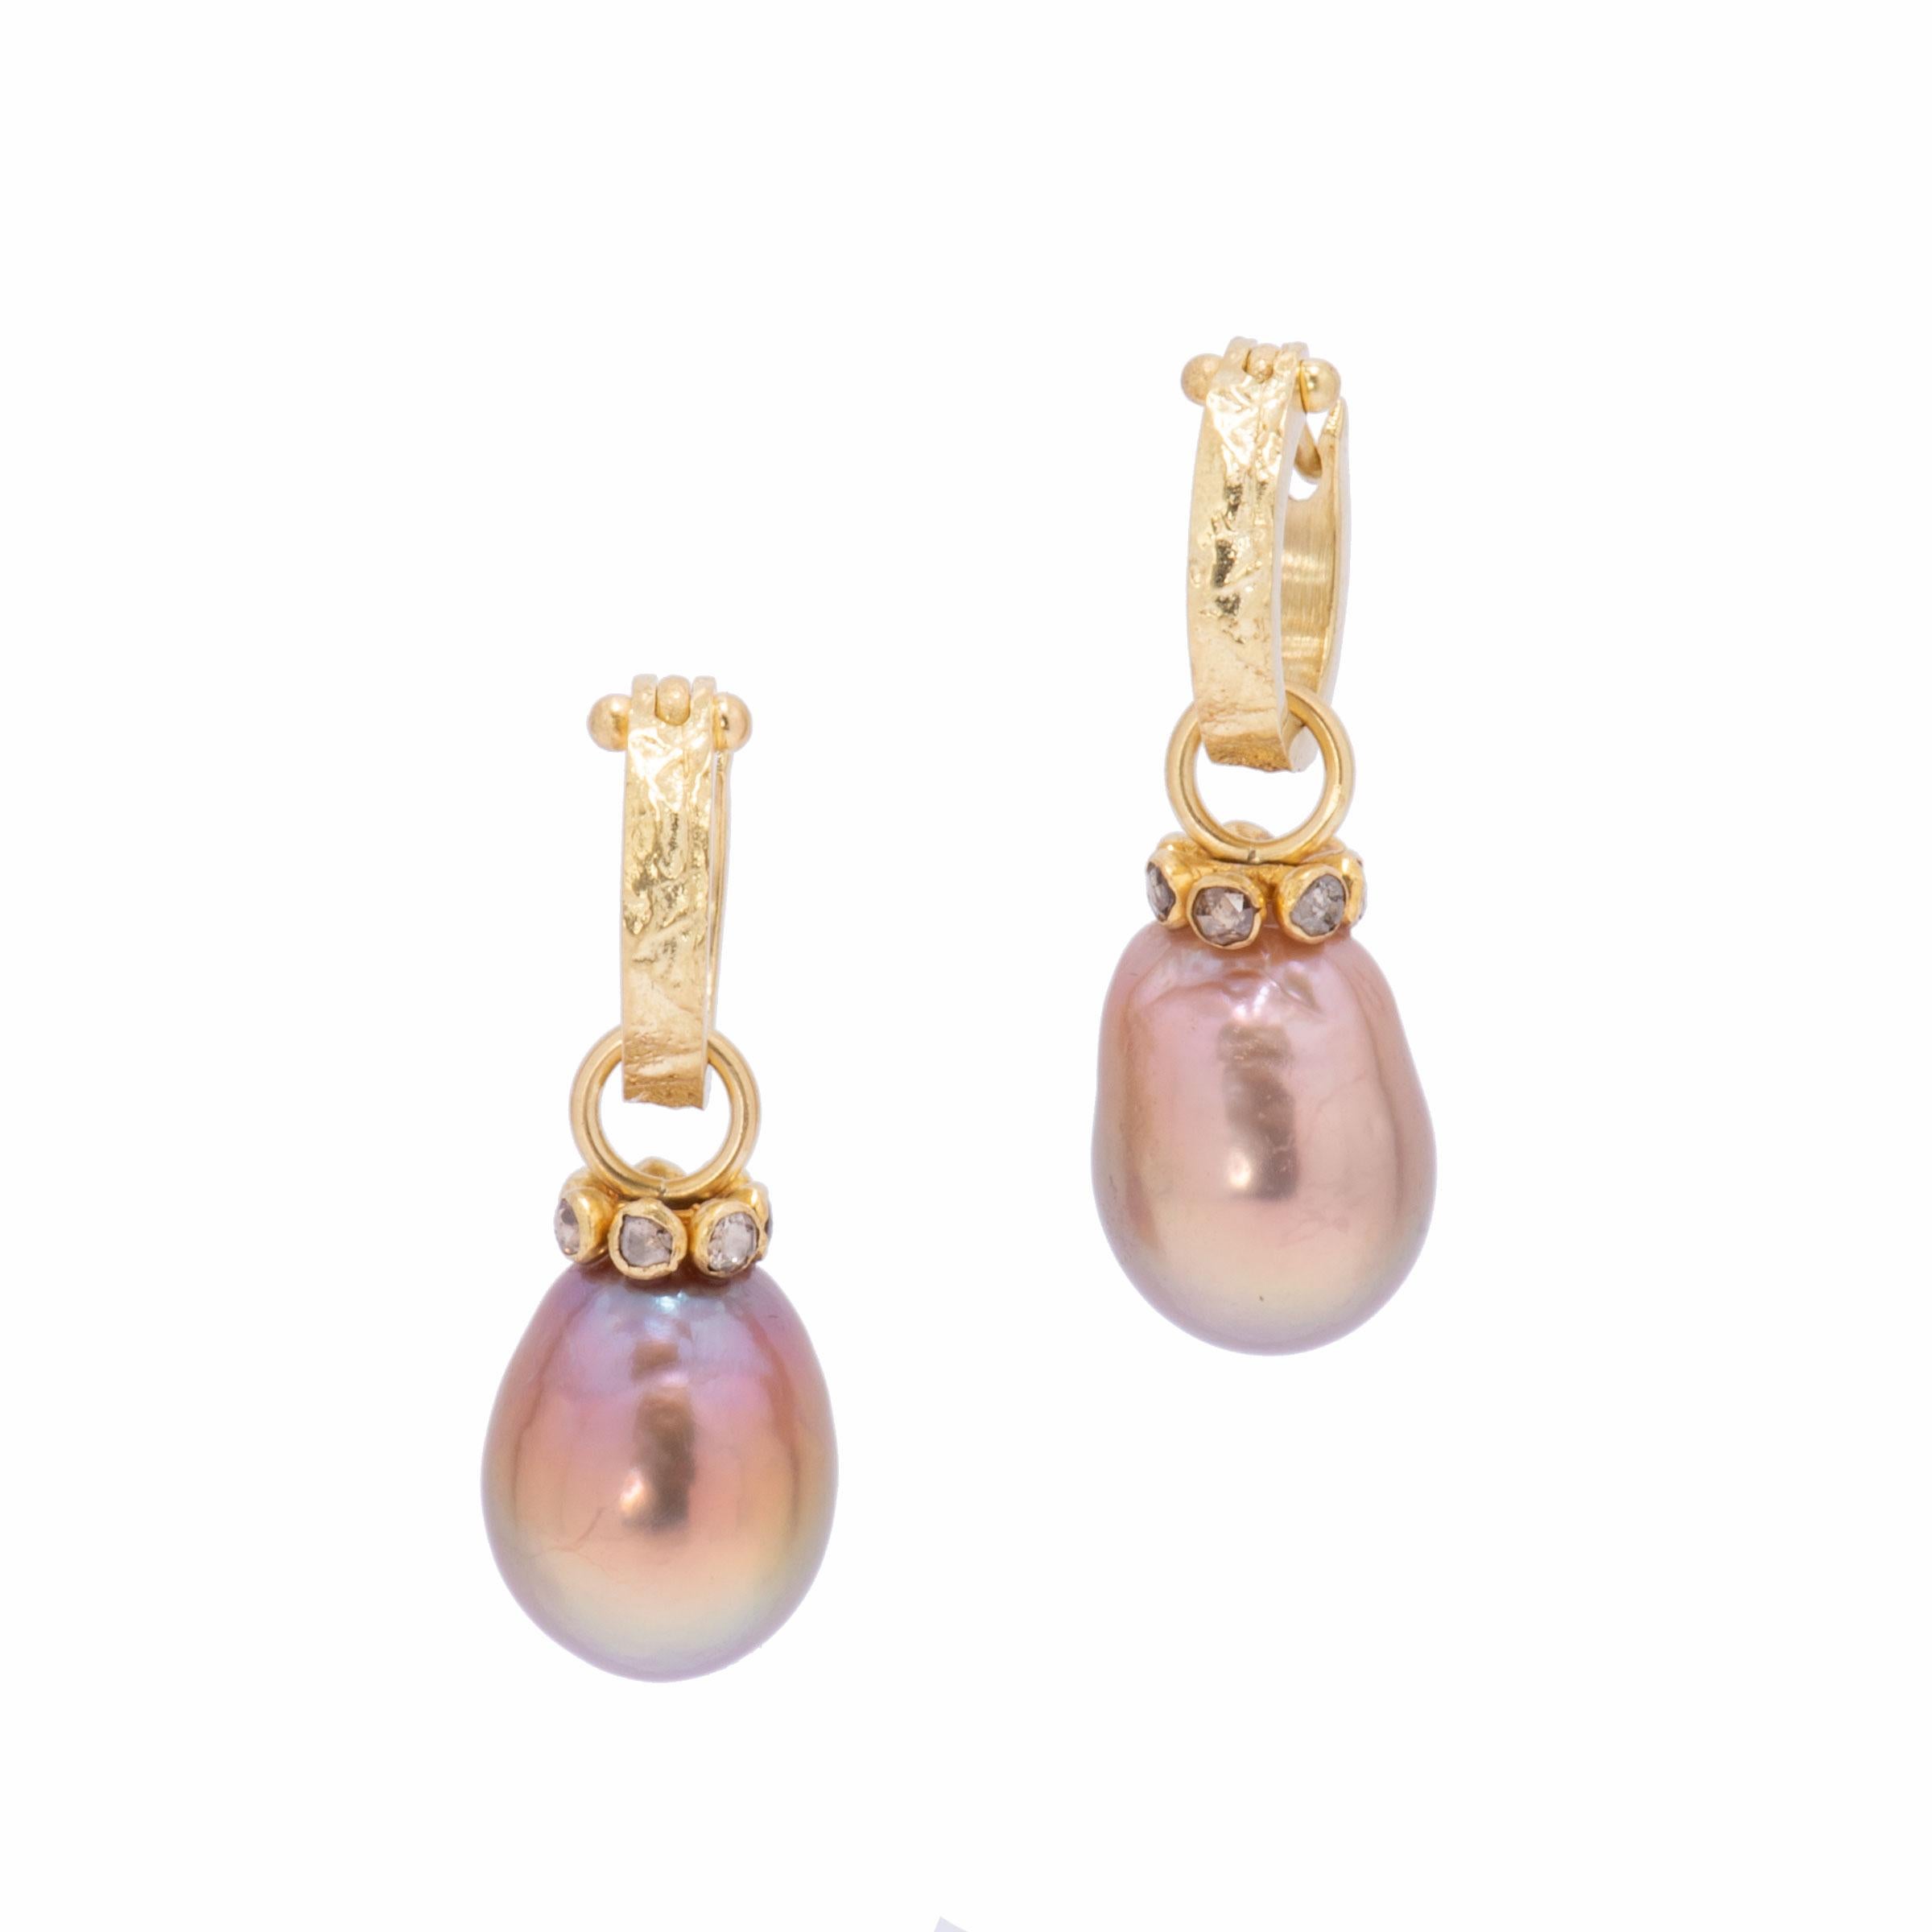 Mauve Pearl Drop Earrings are crafted with Yangtze River pearls and set with a circle of 7 cognac diamonds around each crown set in 22k gold. Naturally irregular pearls are cultured in mussel shells in the delta areas of the Yangtze River in China.